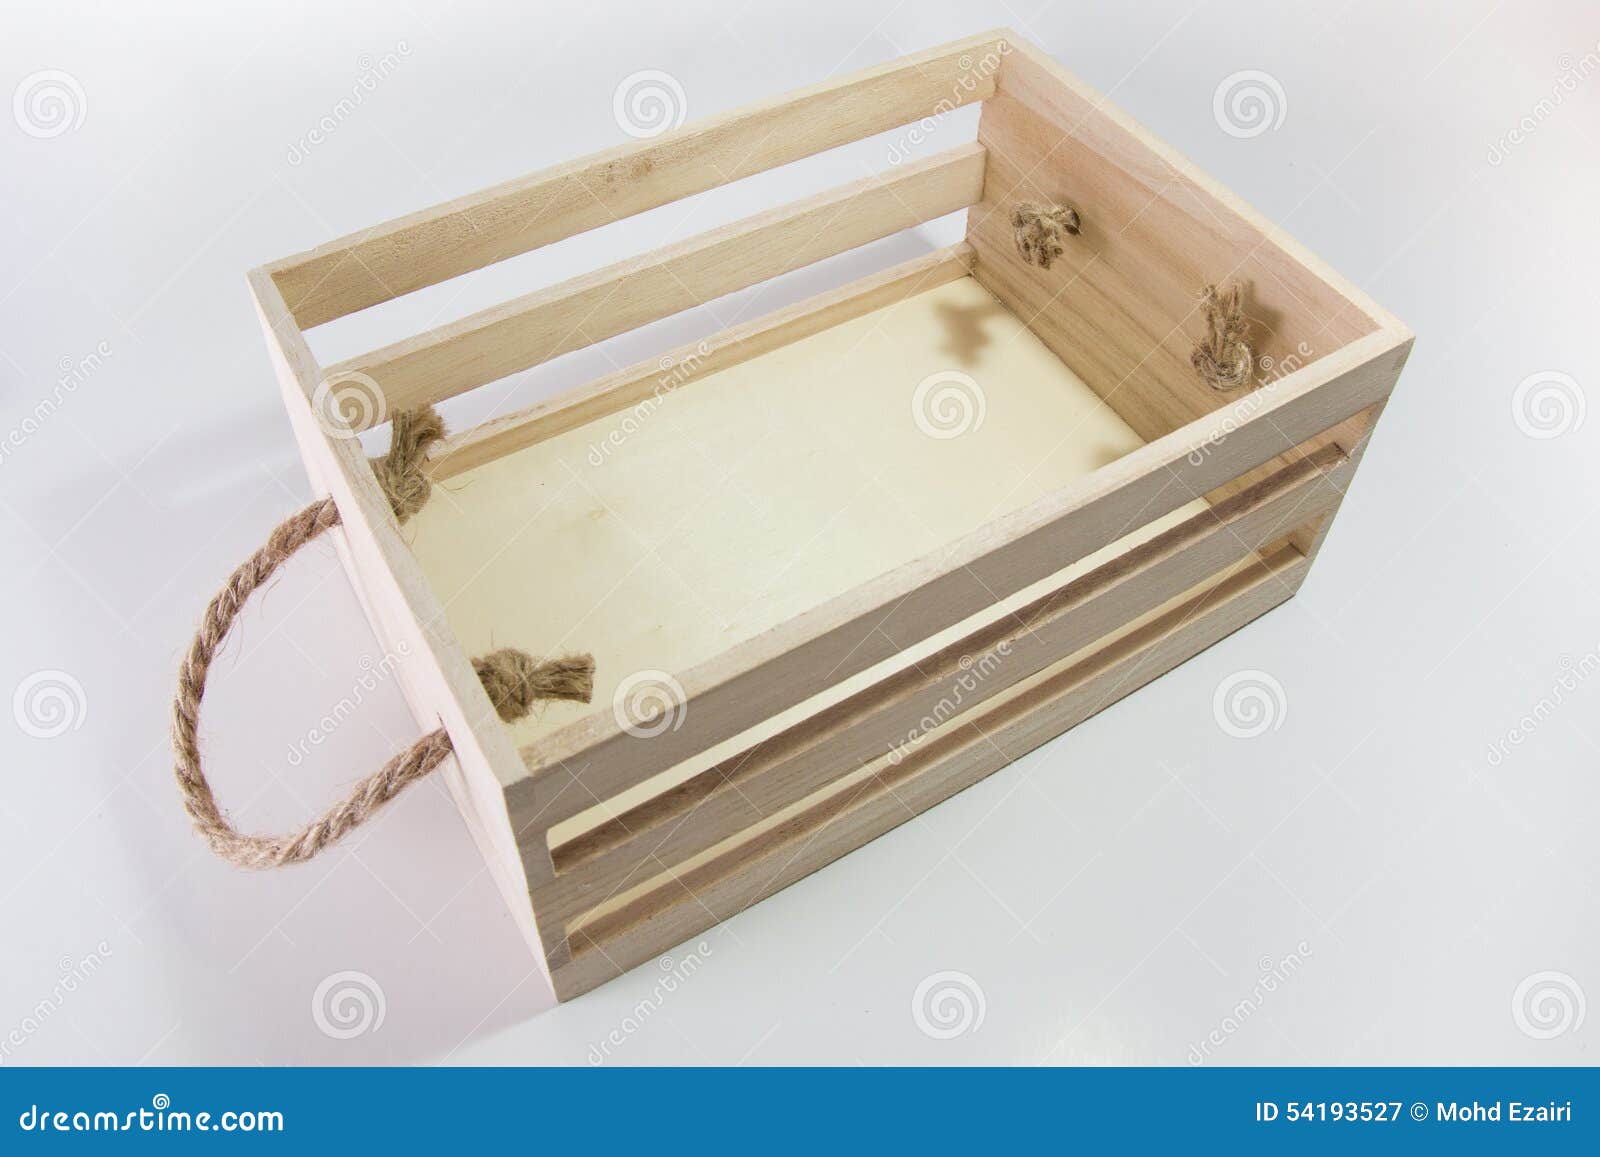 Wooden Box with Rope Handle Stock Image - Image of handle, empty: 54193527